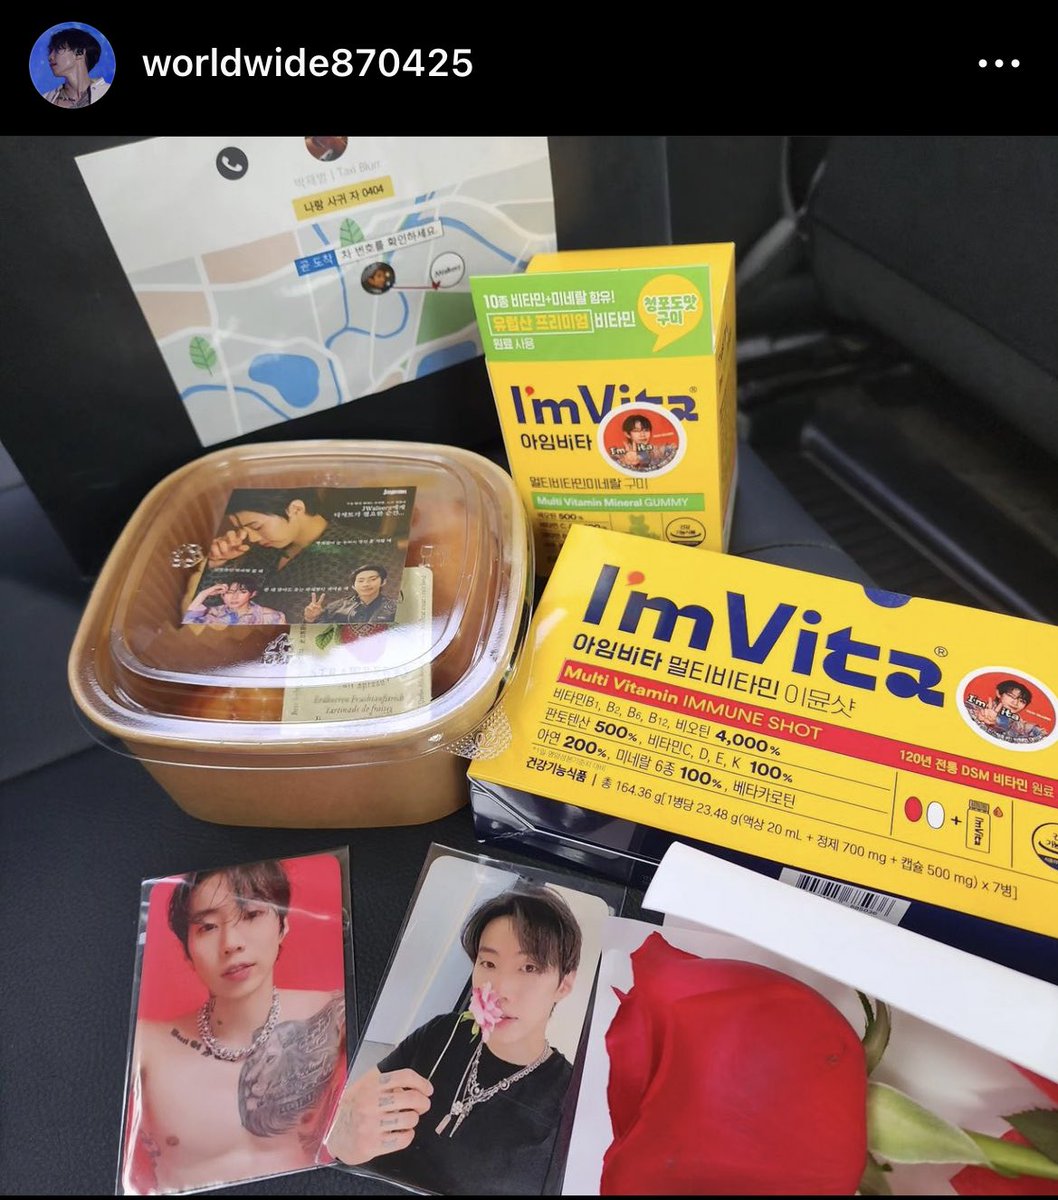 Y’all shut up 😭😭😭 Jay Park prepared lunchbox, vitamins, photocards and GAVE THEM A ROSE for jwalkerz 😭😭😭😭😭😭